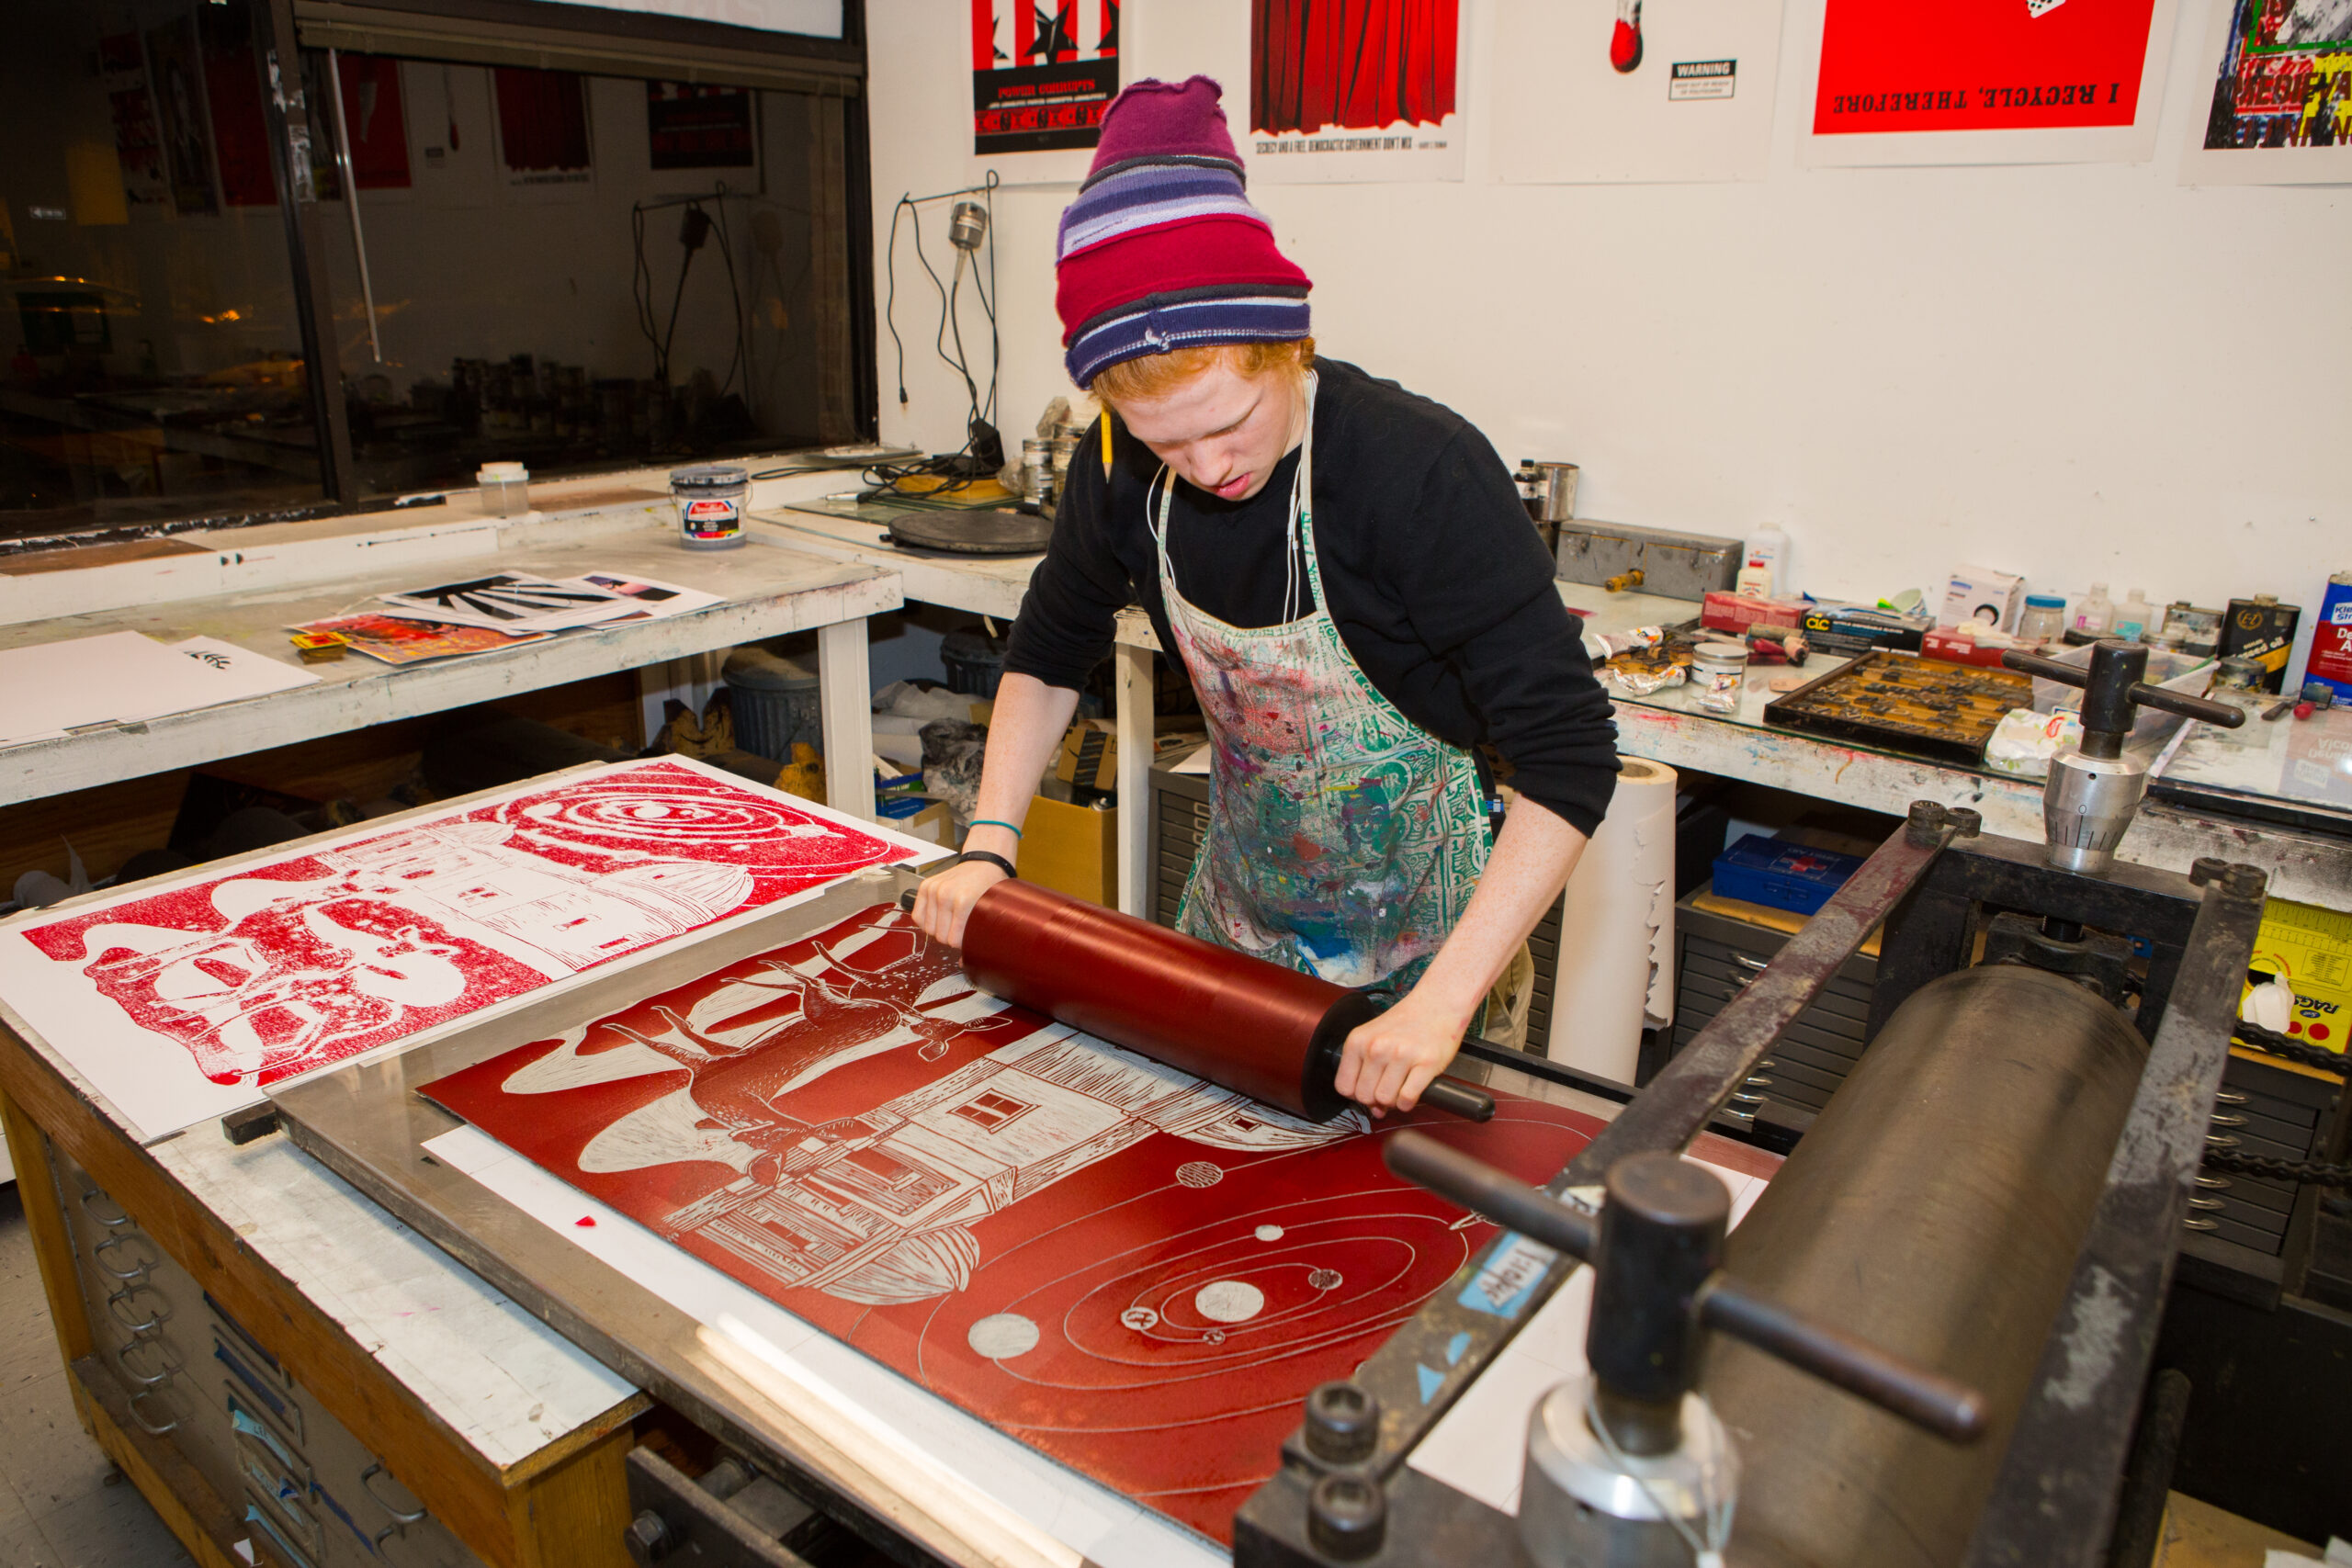 A young man with red hair wearing a red, white, and blue beanie, a black sweatshirt with the sleeves rolled up, and a paint-splattered apron rolls ink onto a carved linoleum block for printing.